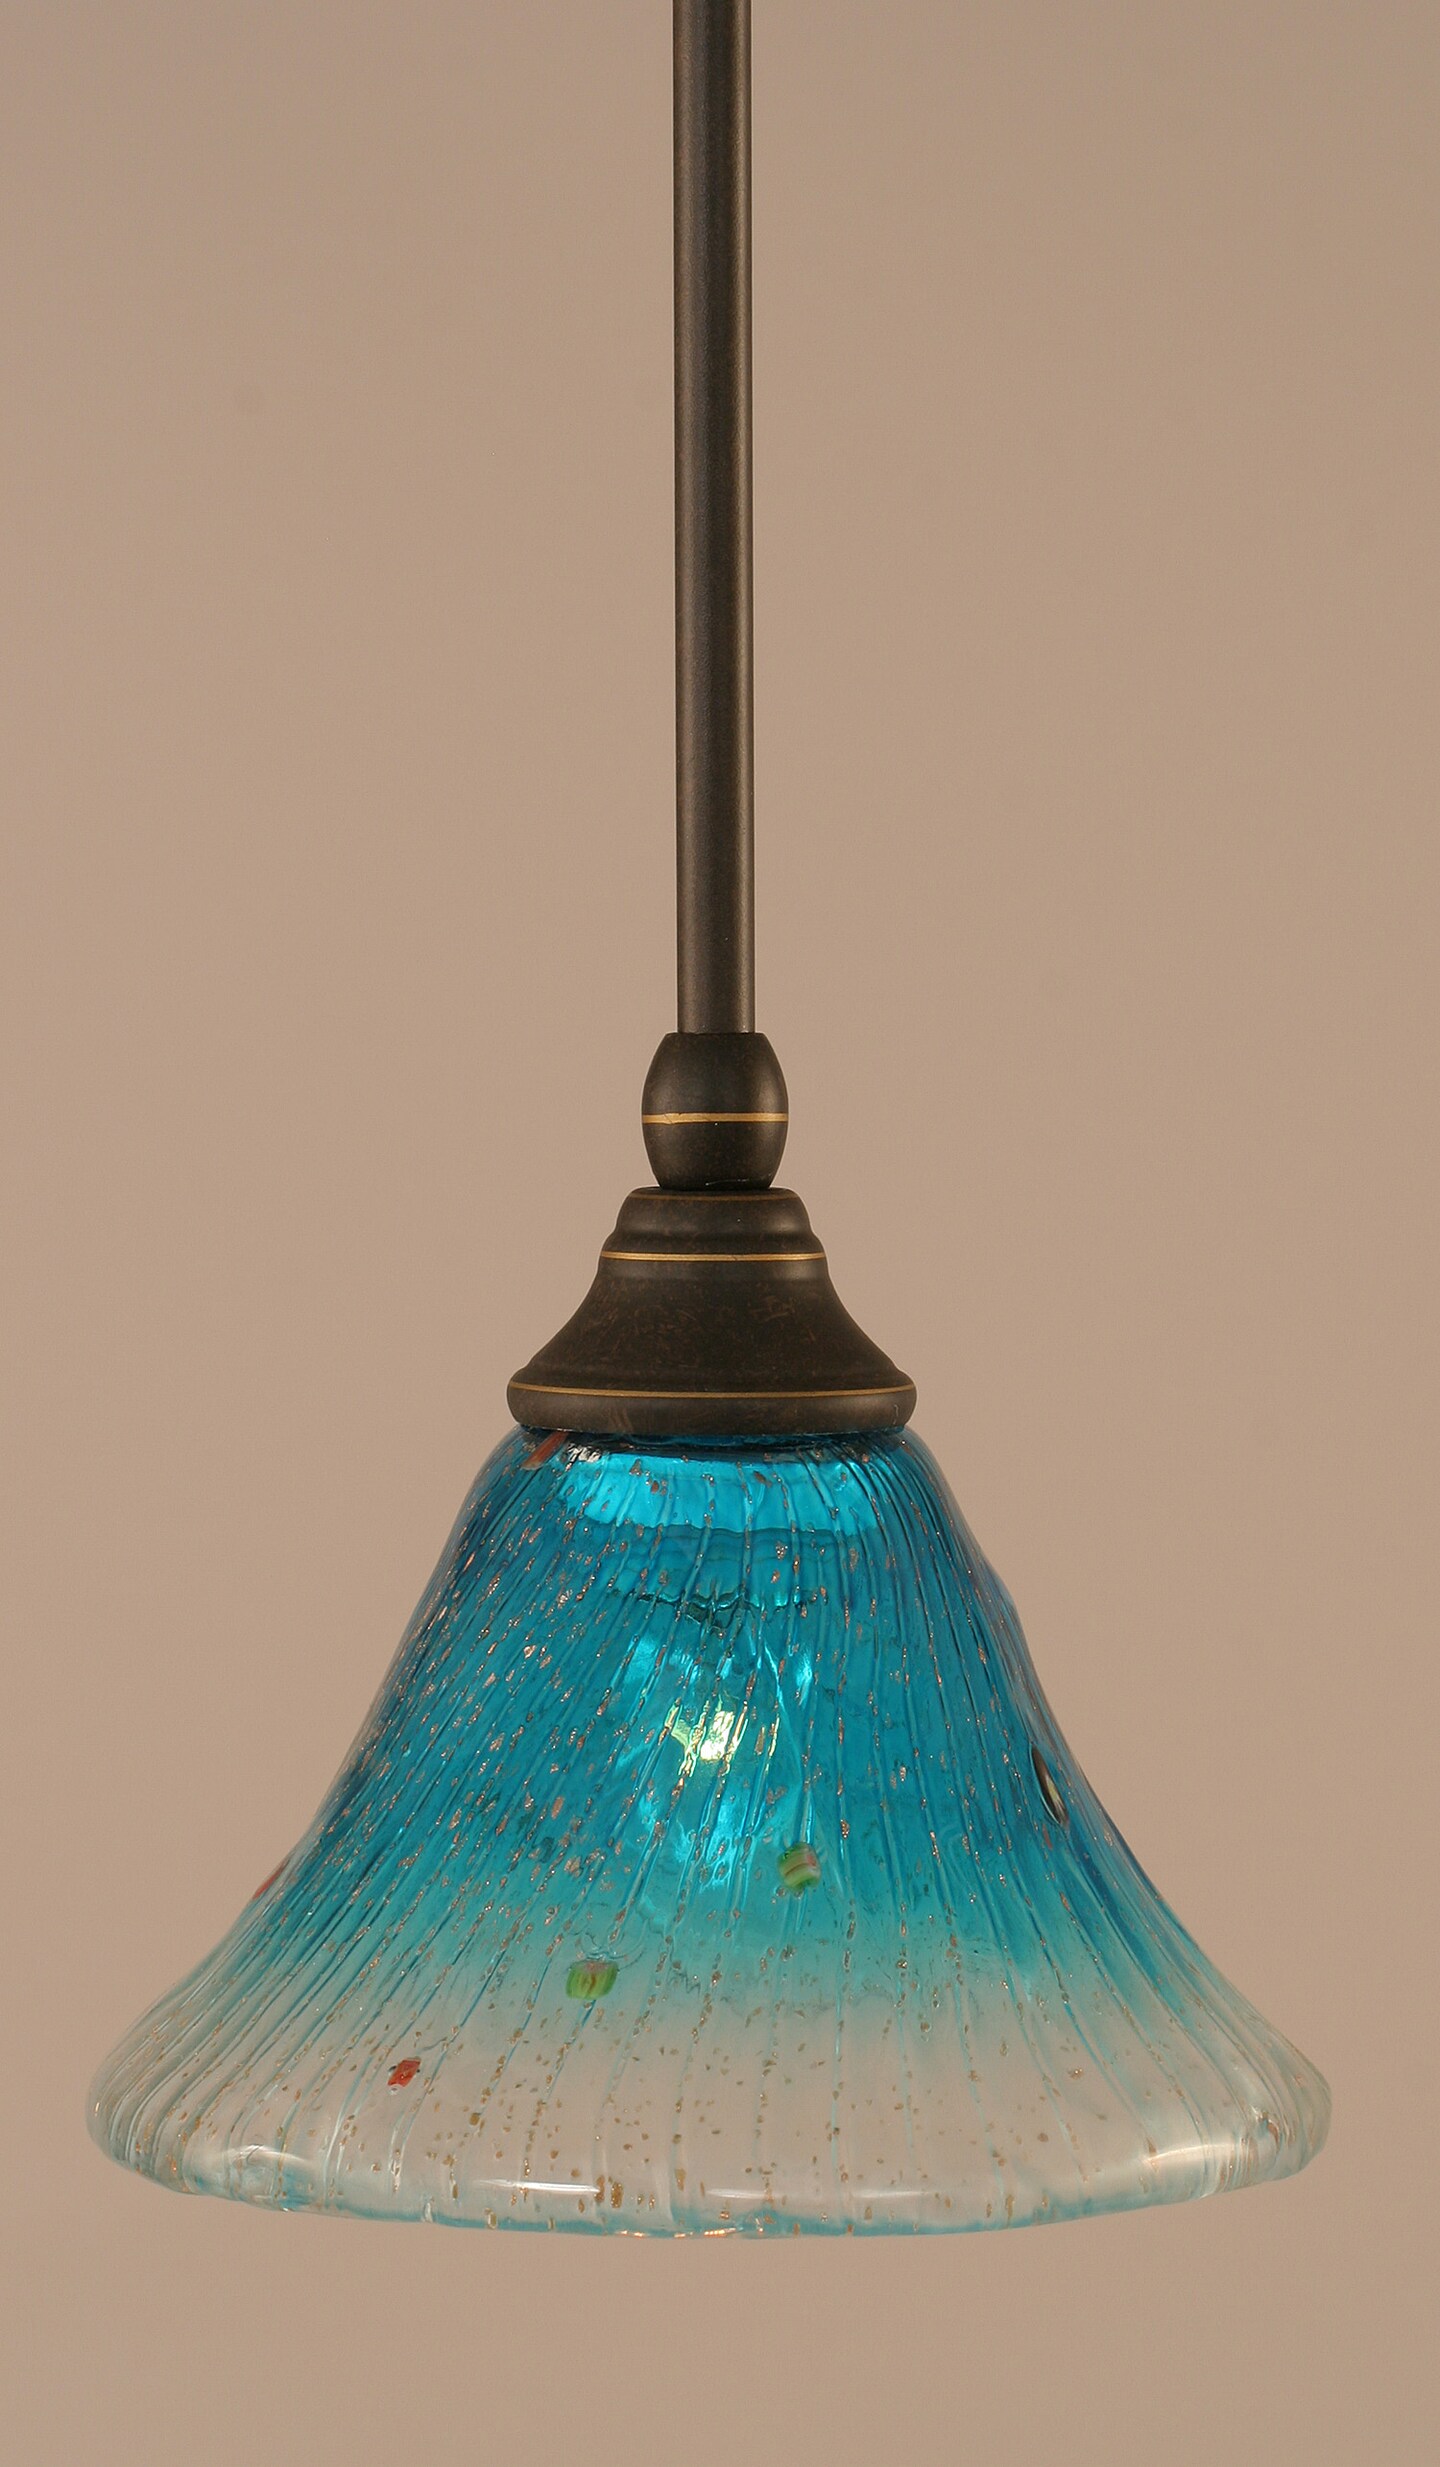 Stem Mini Pendant With Hang Straight Swivel Shown In Dark Granite Finish With 7 Teal Crystal Glass